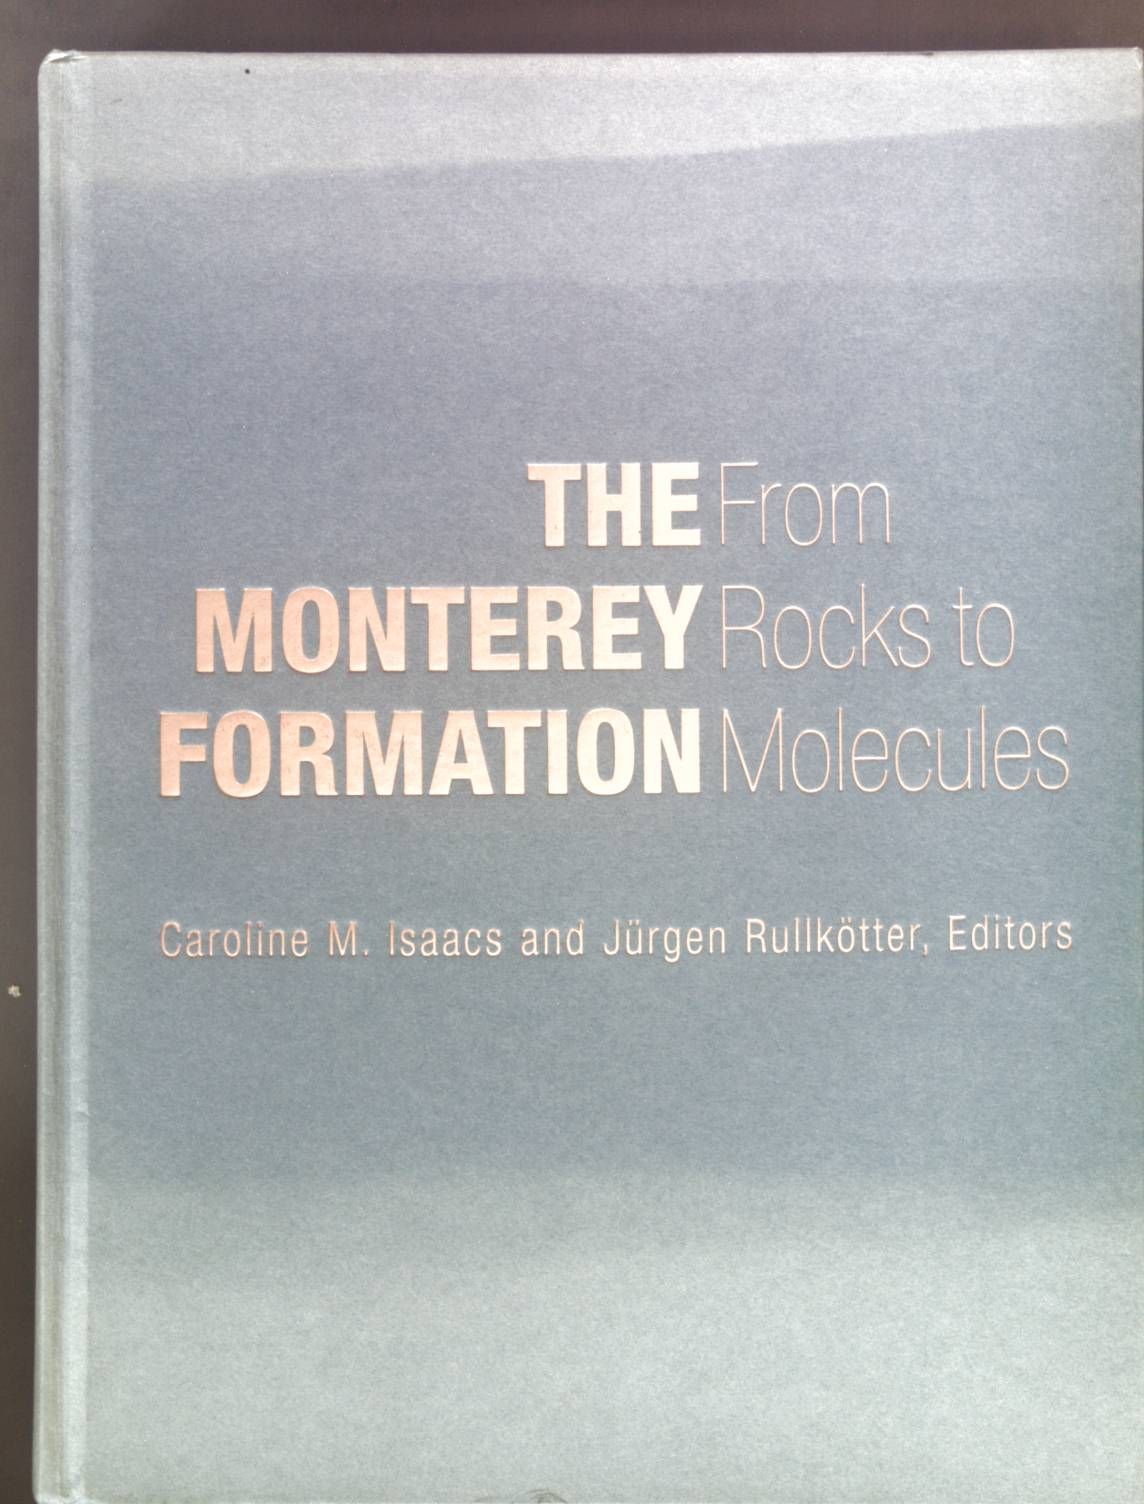 The Monterey Formation: From Rocks to Molecules - Isaacs, Caroline M. and Jurgen Rullkotter